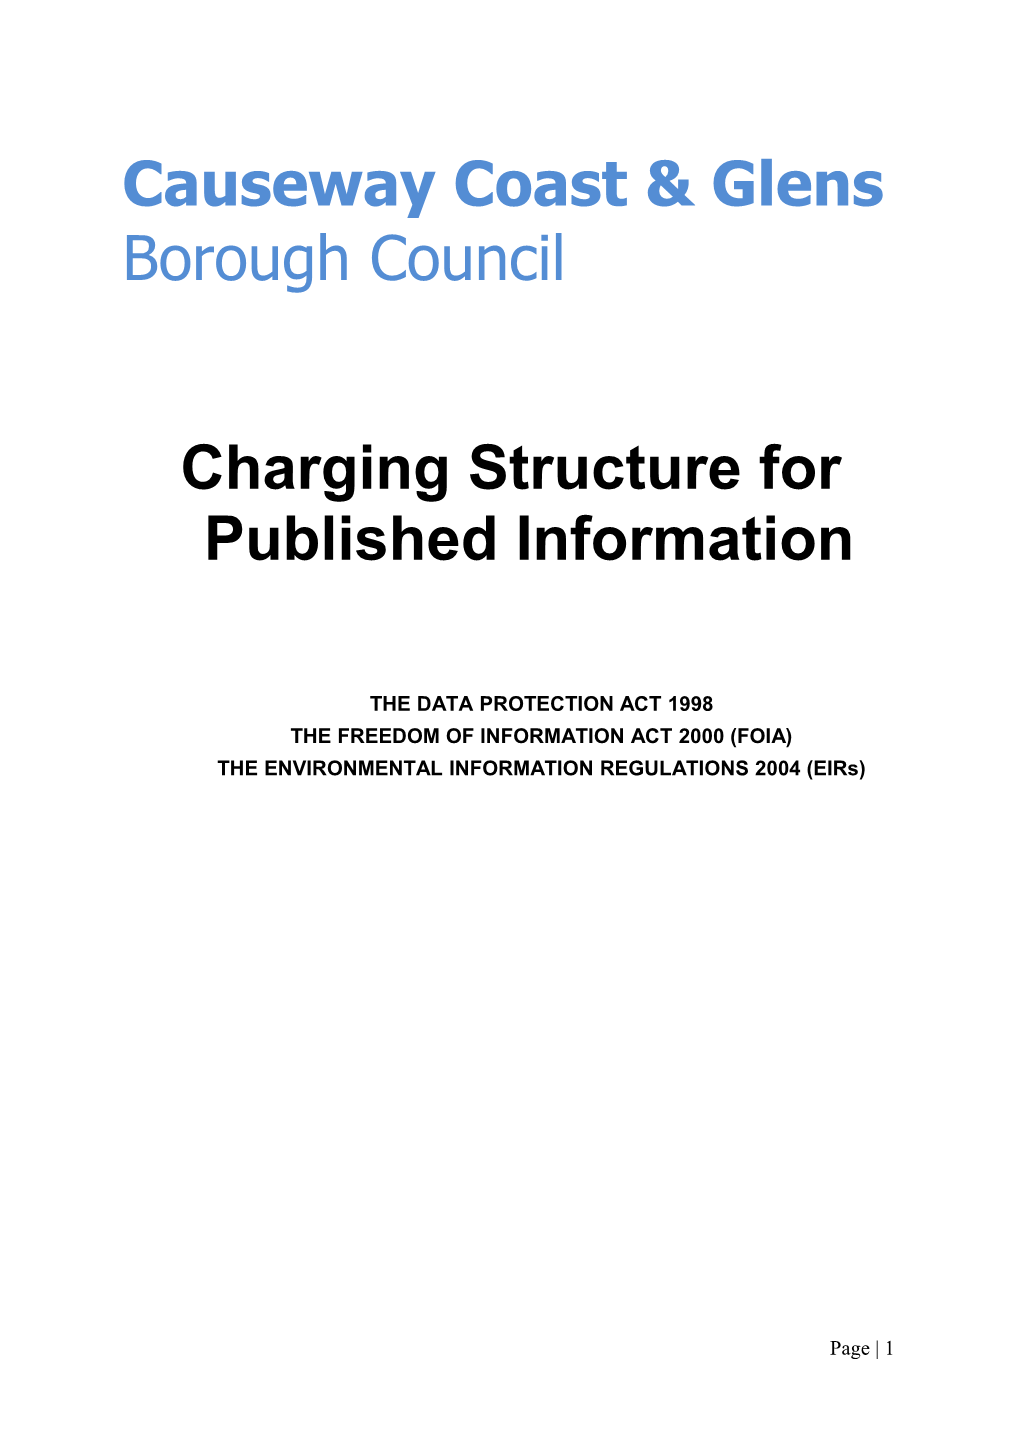 Charging Structure for Published Information